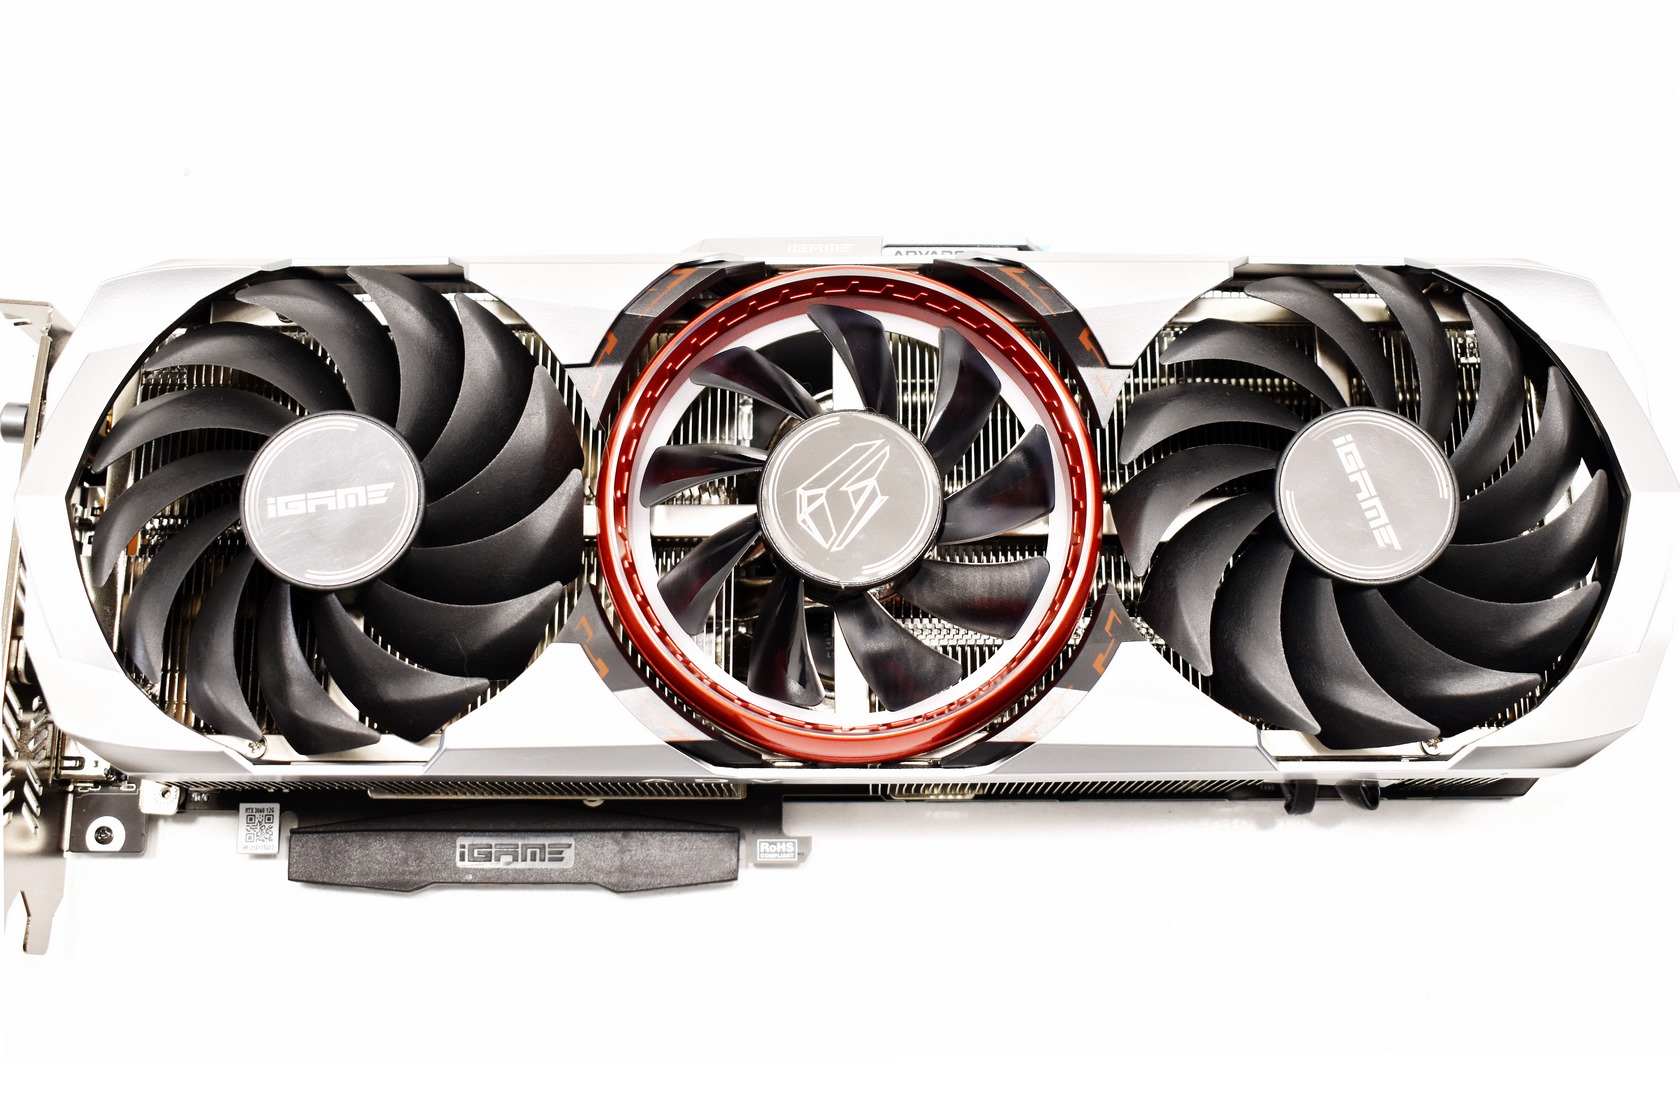 Rtx 3060 colorful ultra w 12g. RTX 3060 ti IGAME. RTX 3060 12gb colorful IGAME. Colorful IGAME GEFORCE rtx3060 Ultra w OC 12g. IGAME RTX 3070 ti.